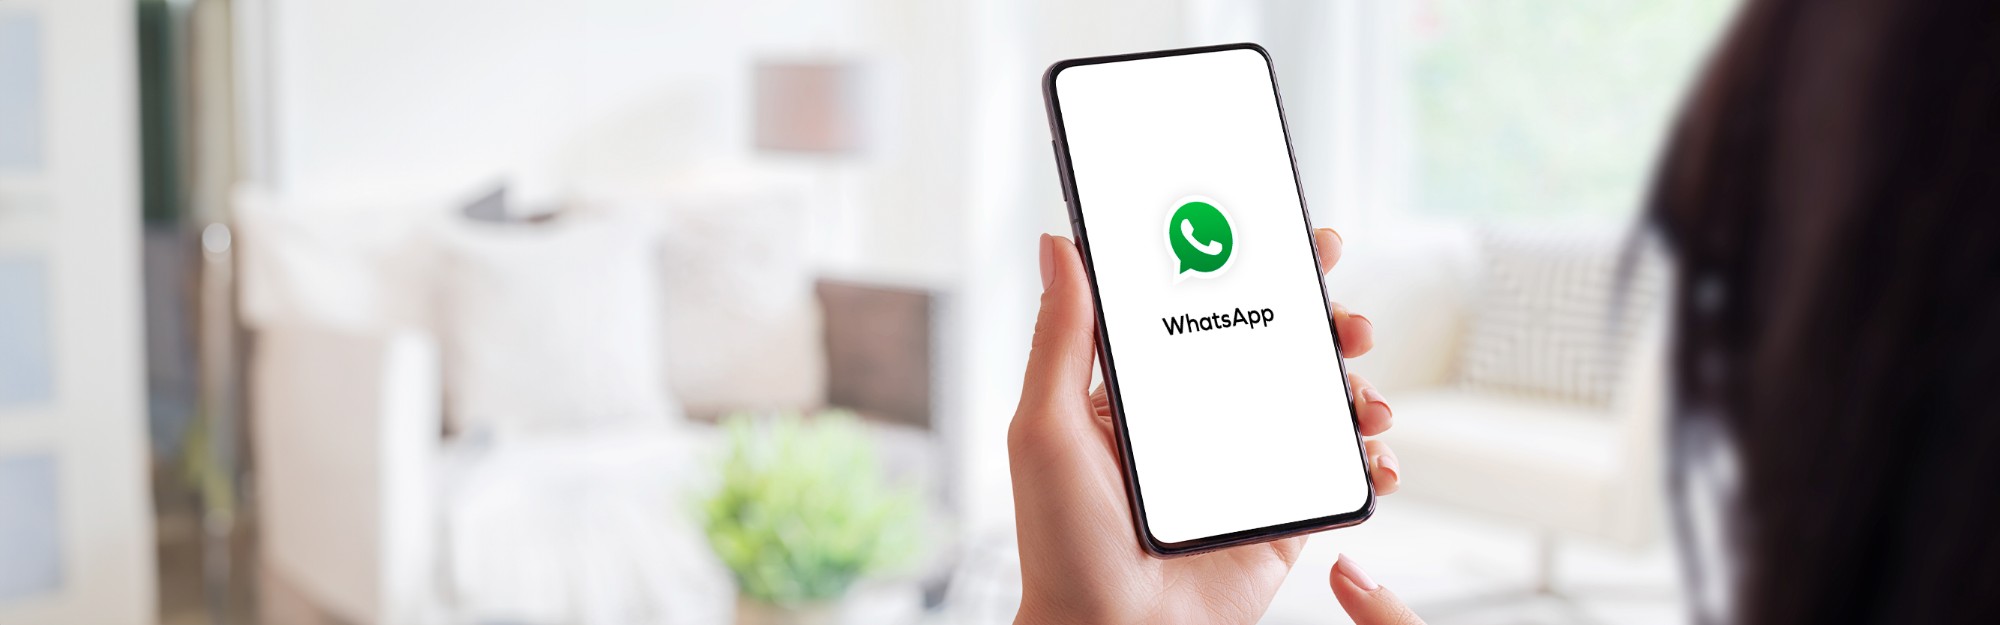 Join the new WhatsApp broadcast channel from Mediaelx for real estate agents